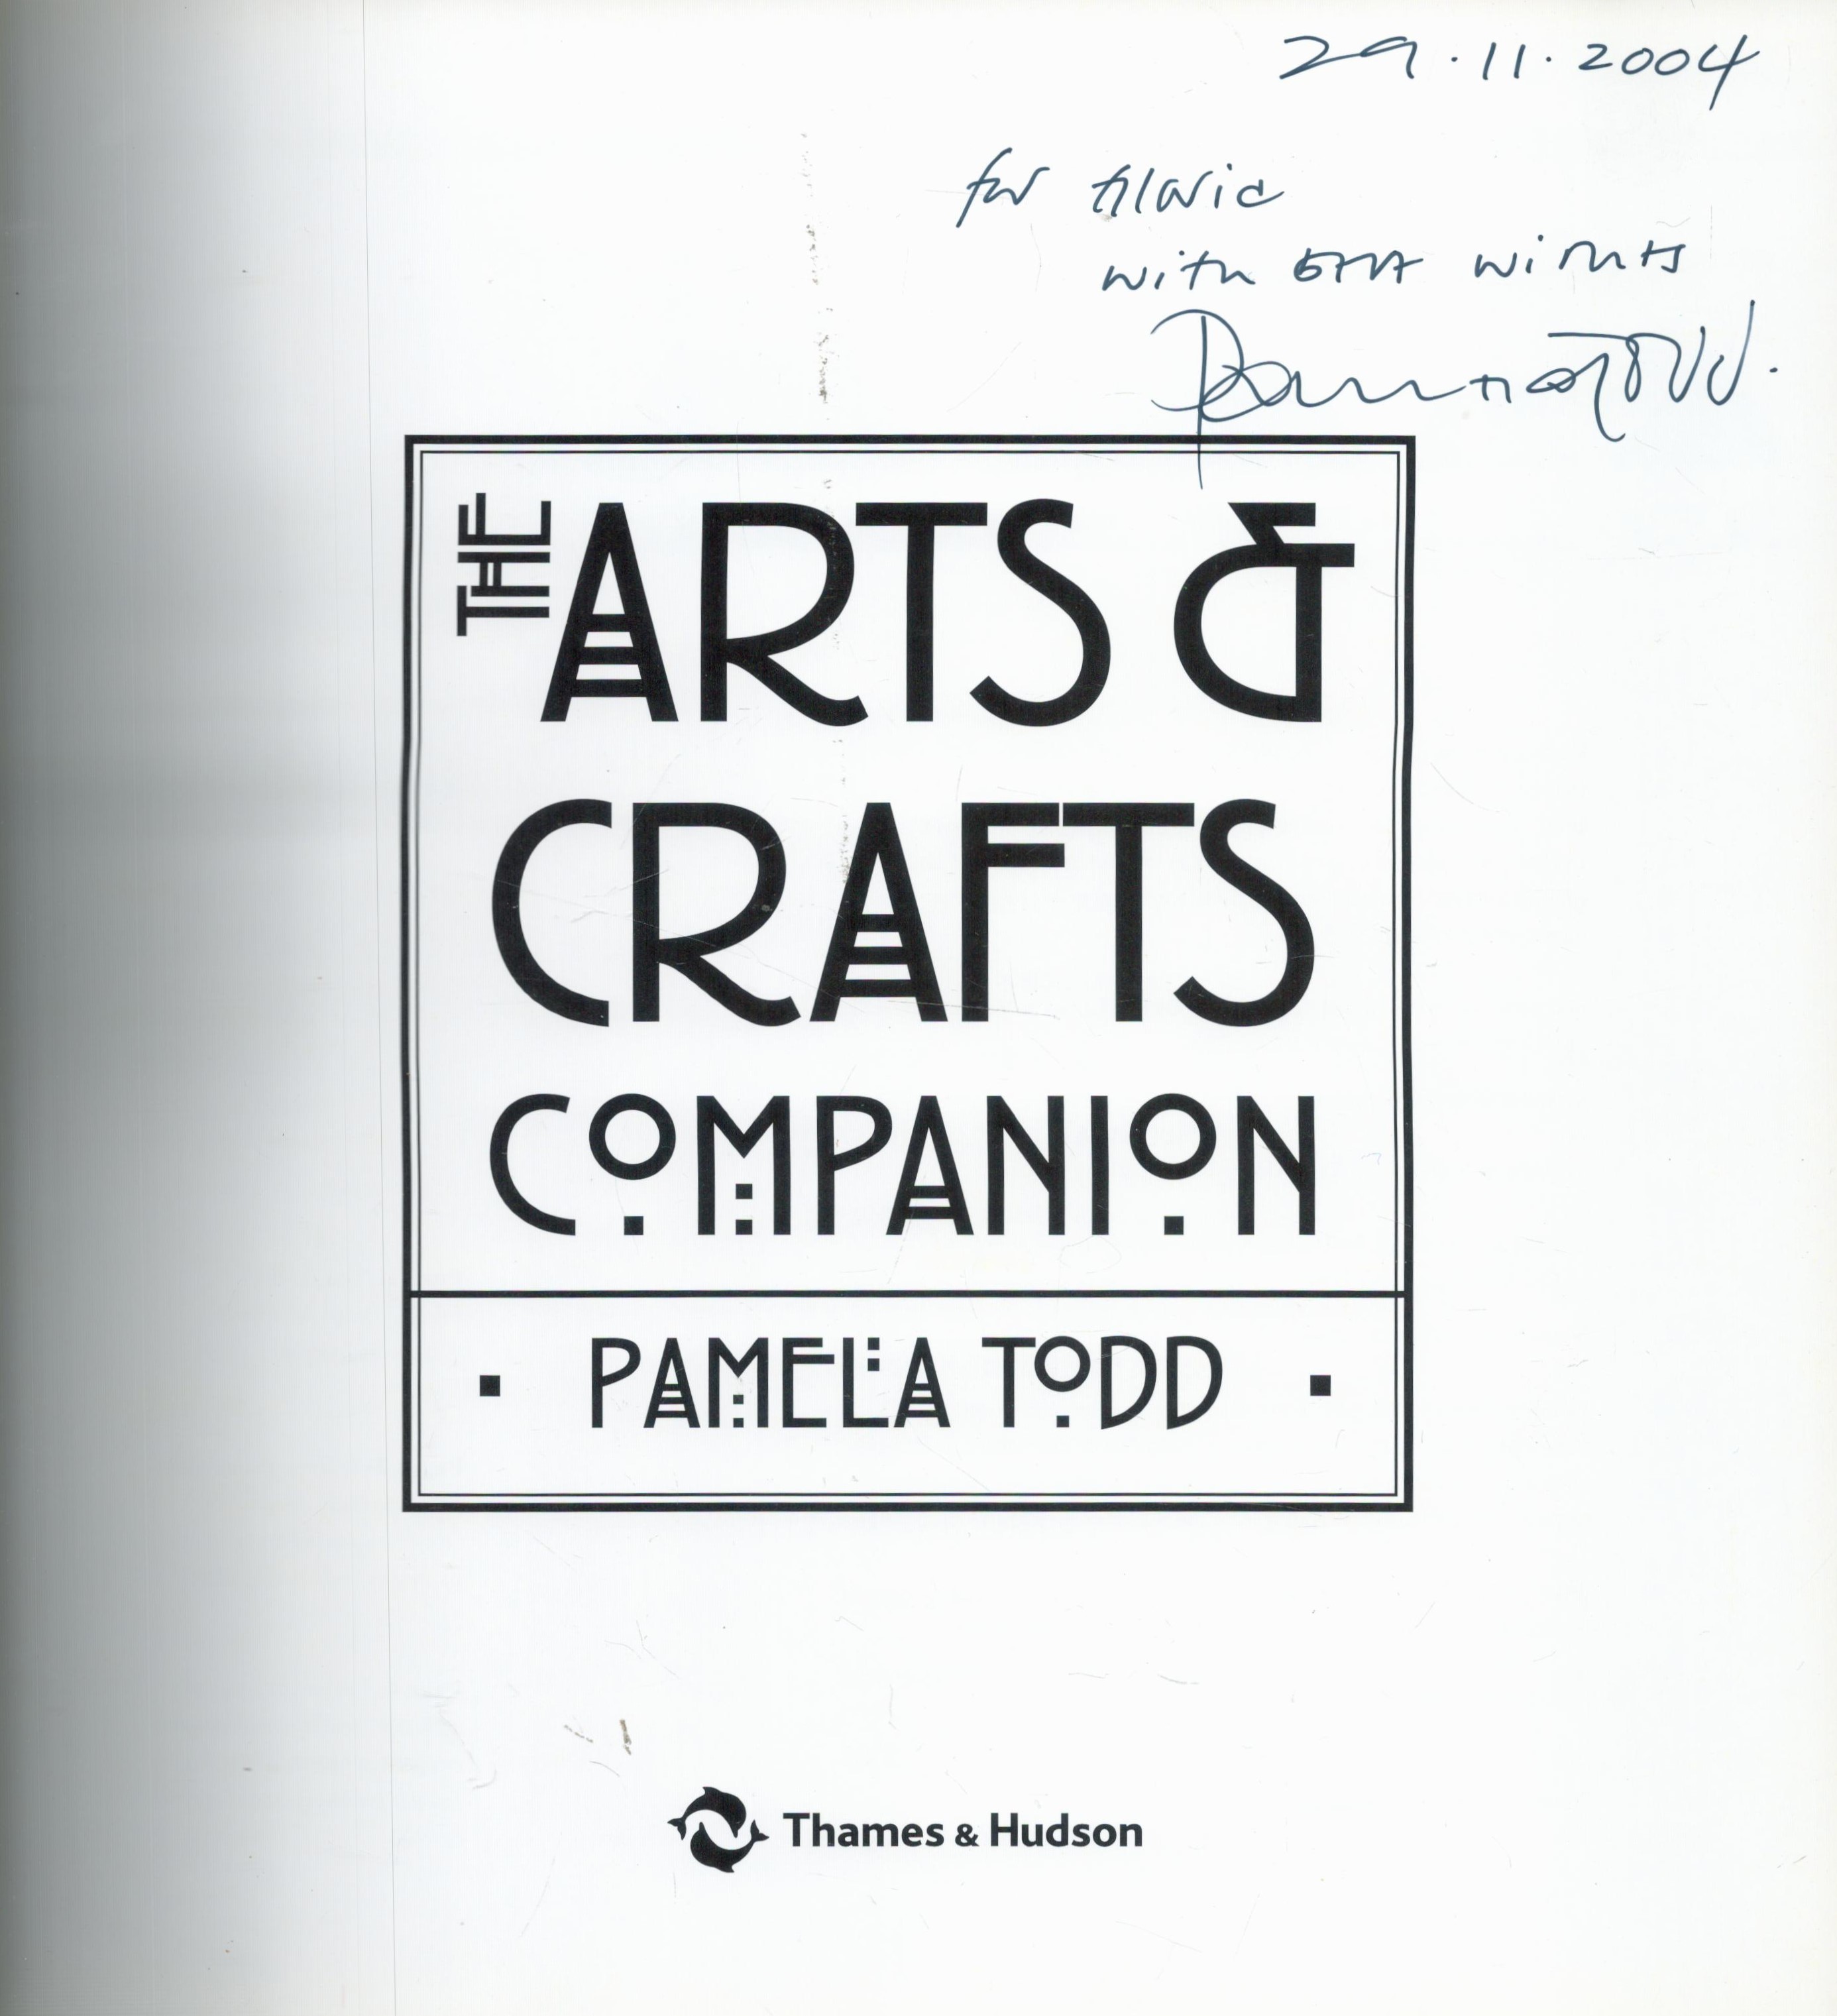 Pamela Todd Signed Book The Arts and Crafts Companion by Pamela Todd 2004 First Edition Hardback - Image 2 of 3